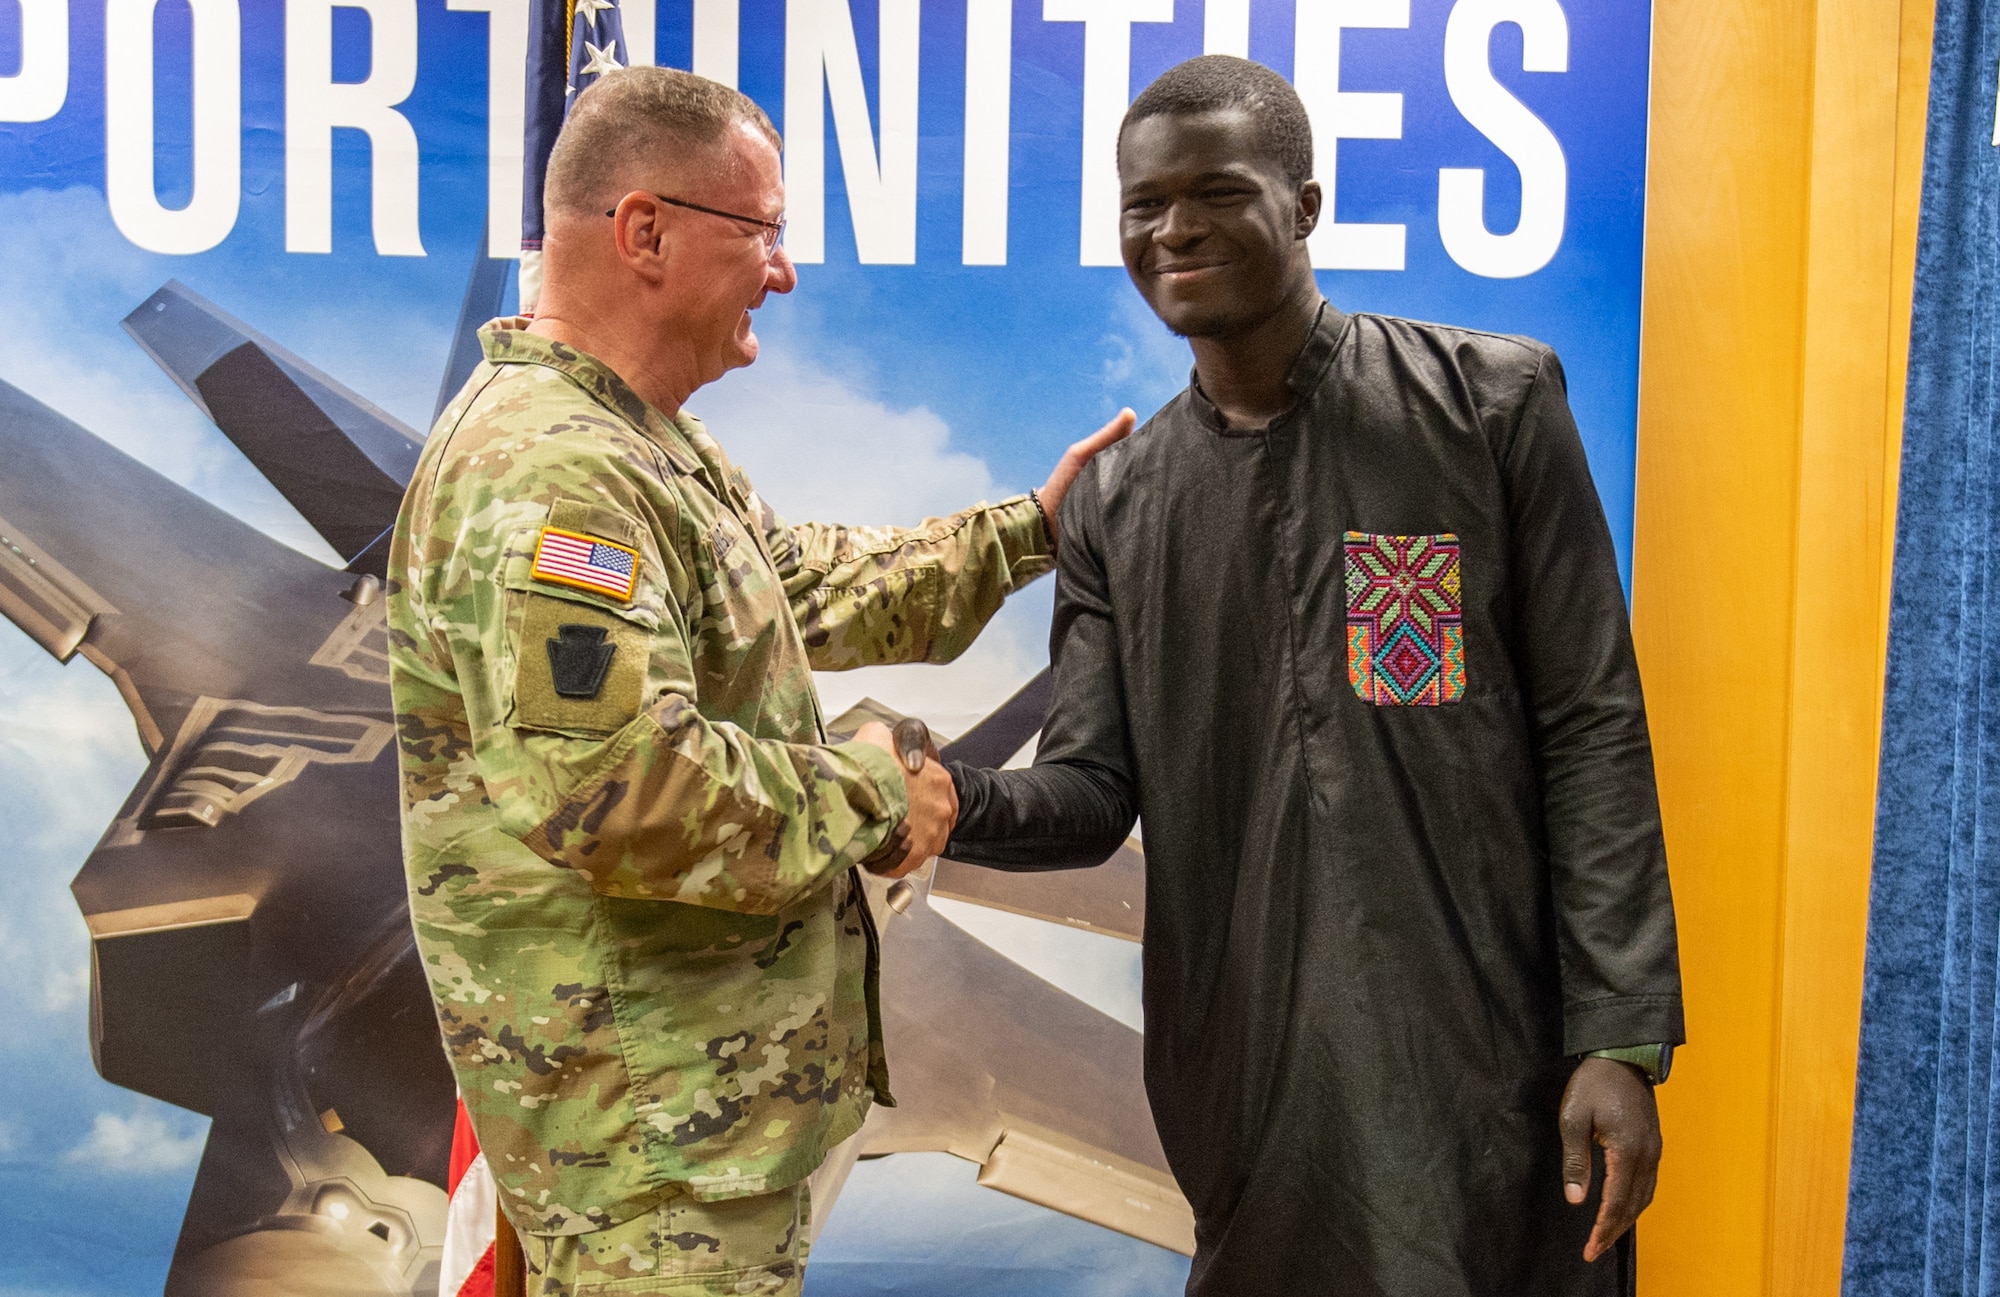 The newest member of the 158th Fighter Wing, Airman Libass Mbengue, shakes hands with Maj. Gen. Gregory Knight, adjutant general of the Vermont National Guard, at Vermont Air National Guard Base, South Burlington, Vermont, May 18, 2023. Mbengue moved to Vermont in 2018 from Senegal, Africa.